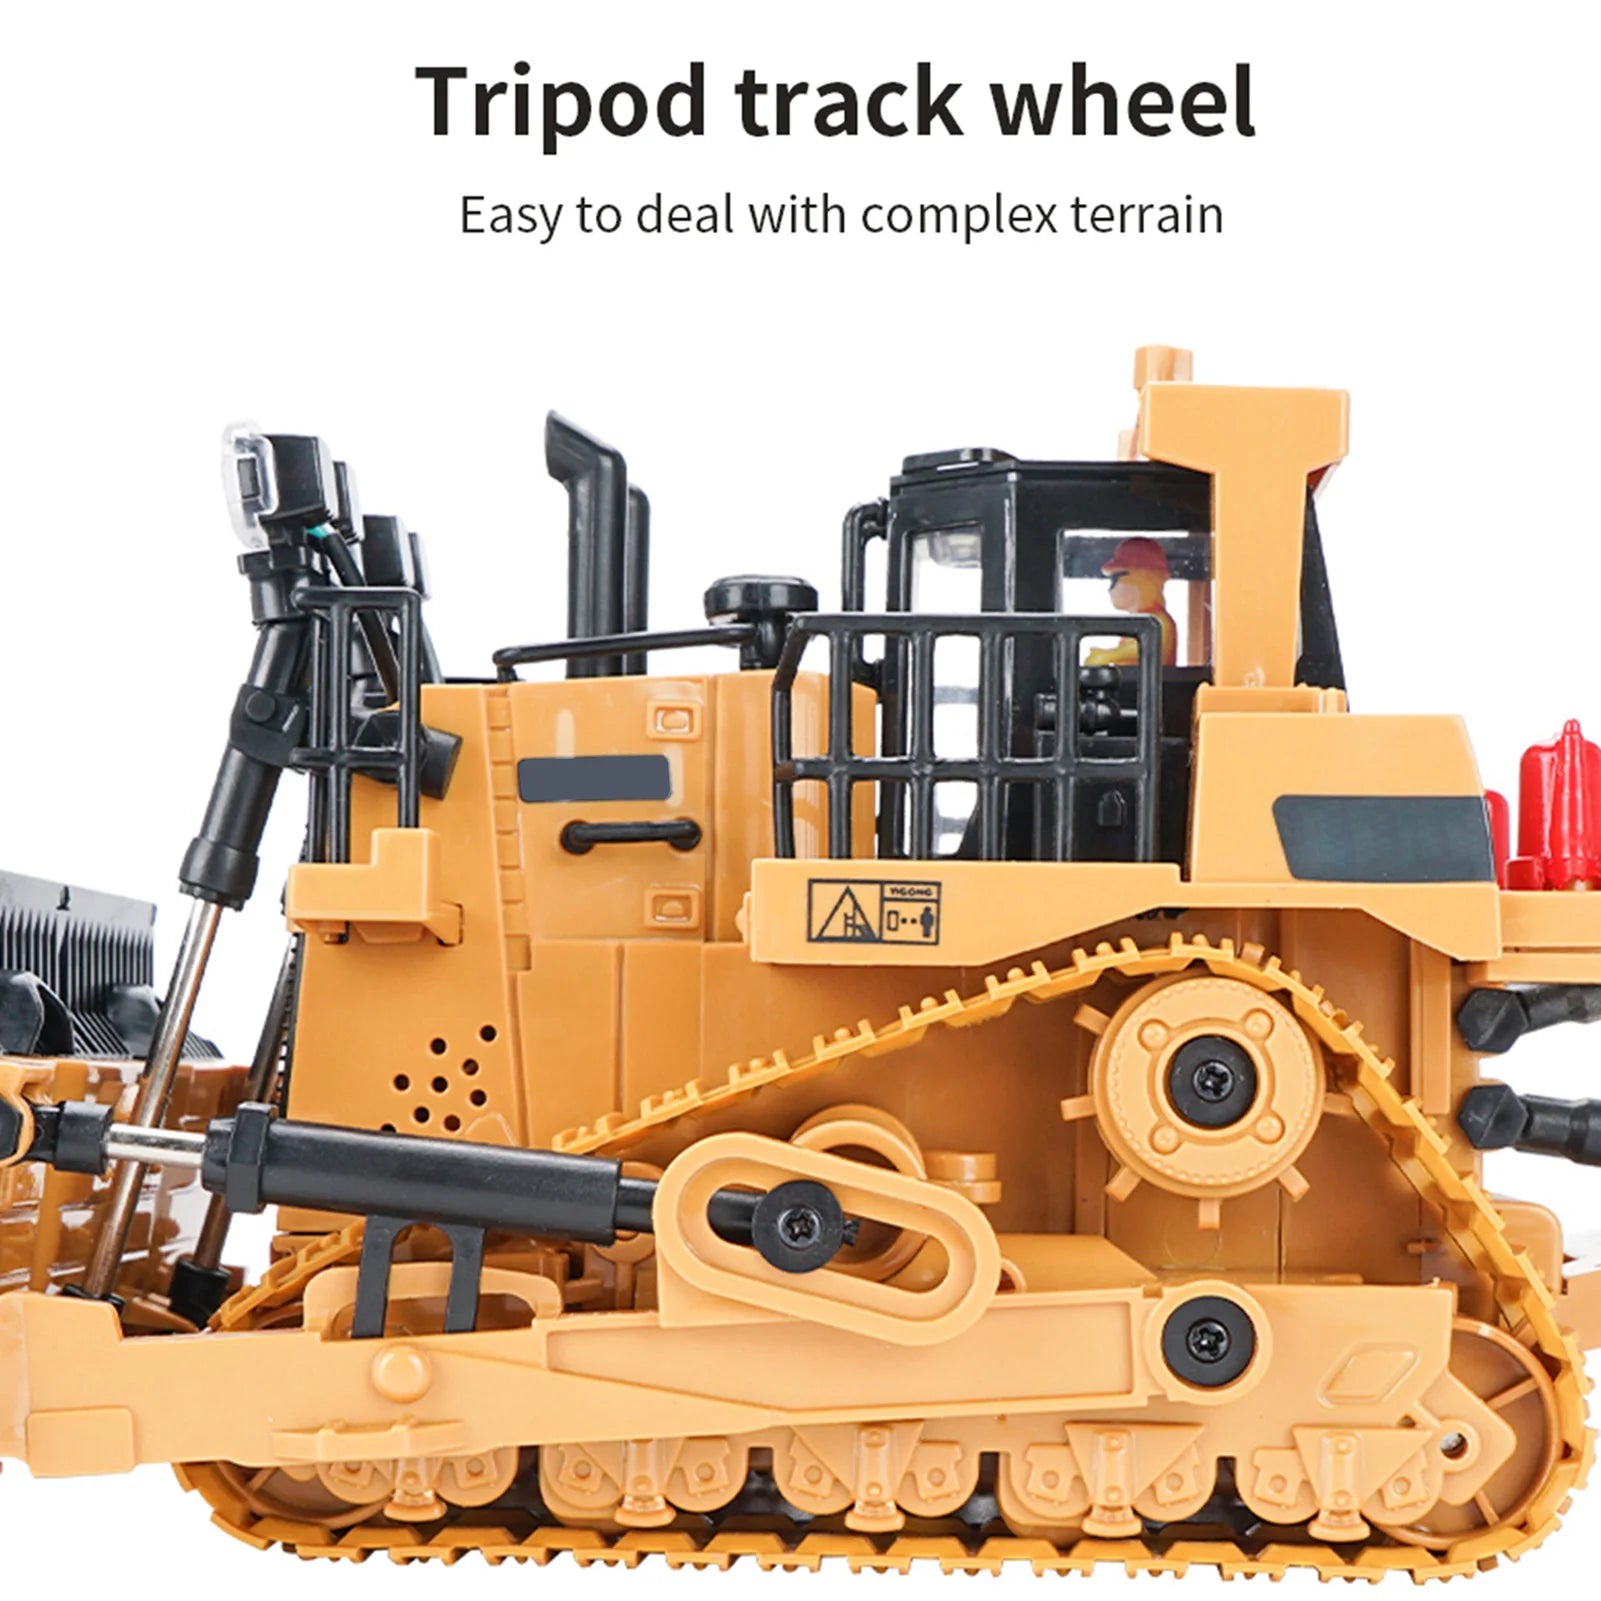 Tripod track wheel Easy to deal with complex terrain 2